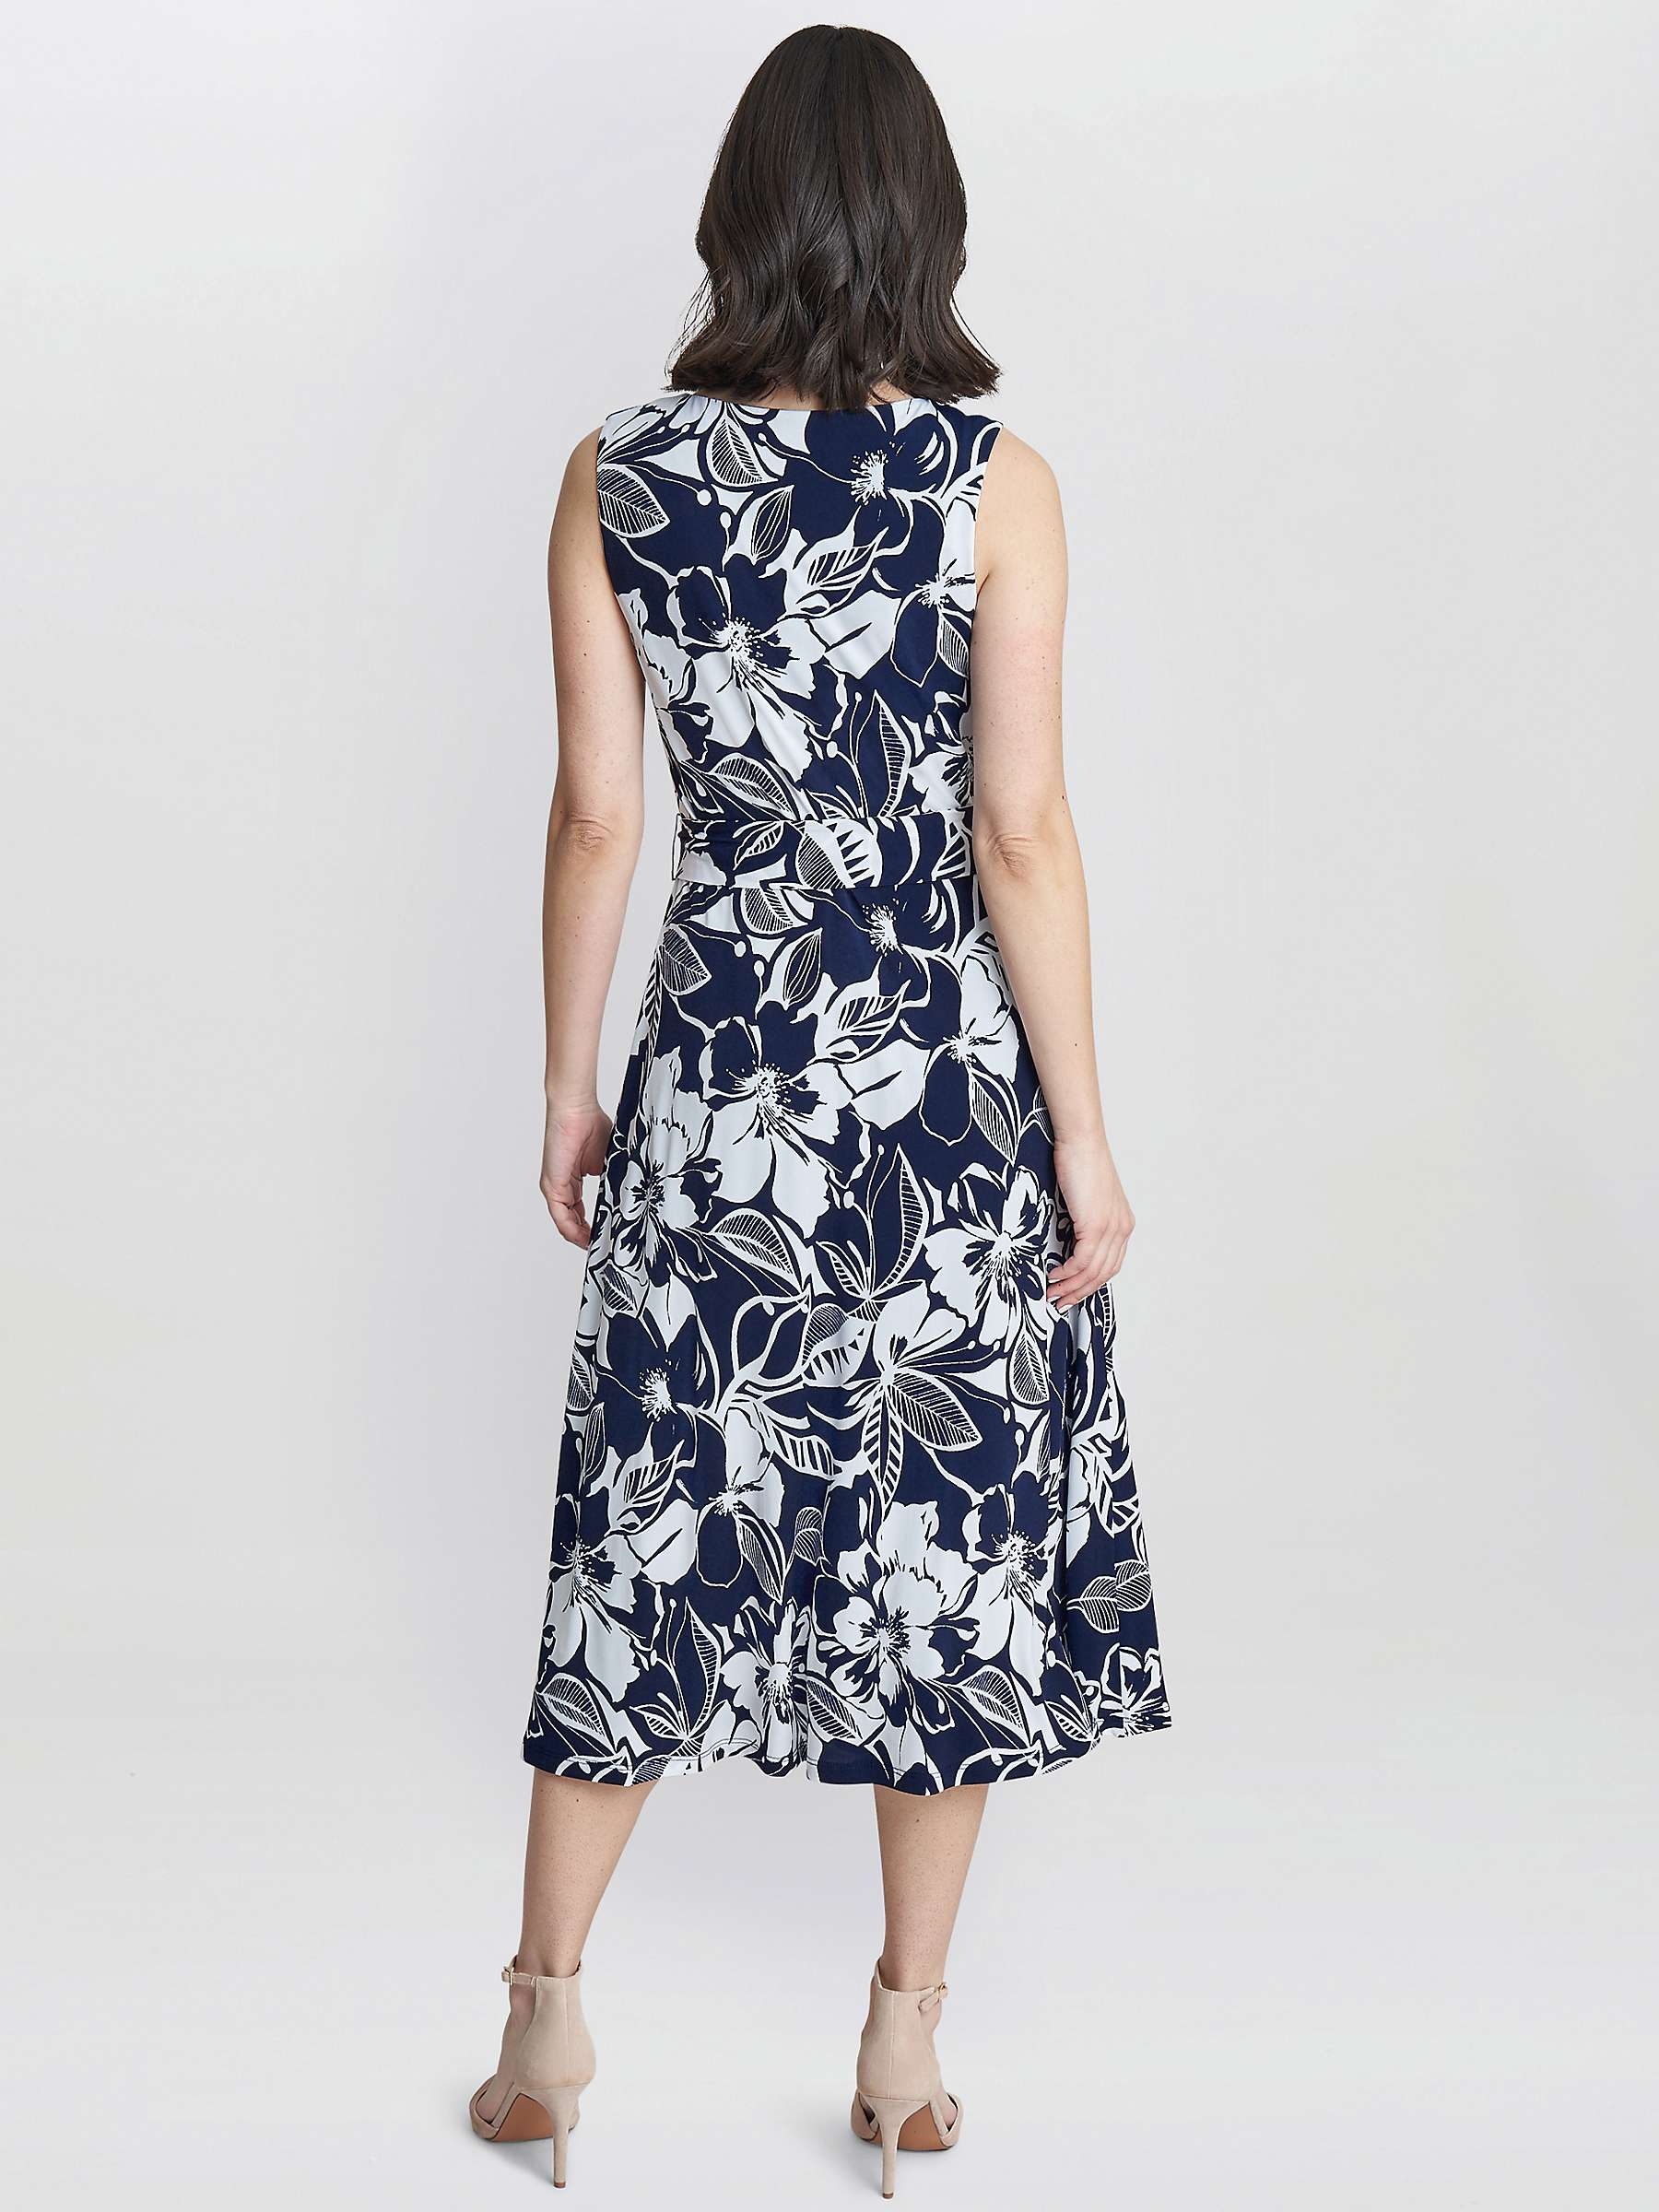 Buy Gina Bacconi Denise Fit And Flare Jersey Dress, Navy/White Online at johnlewis.com